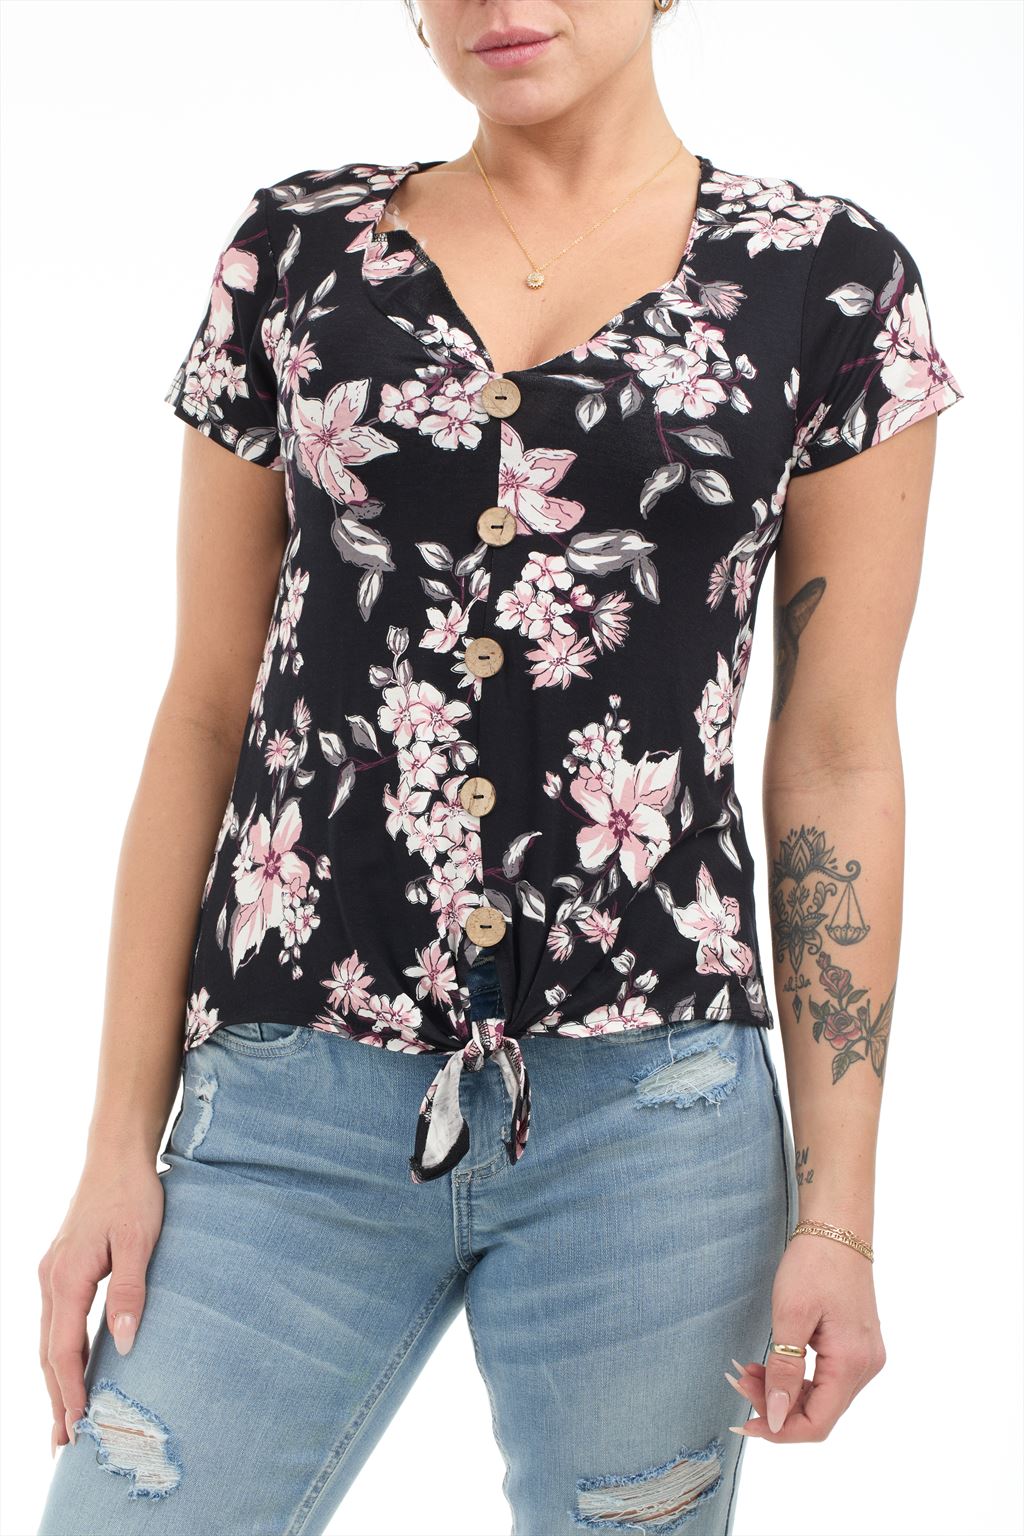 Printed blouse tied at the front